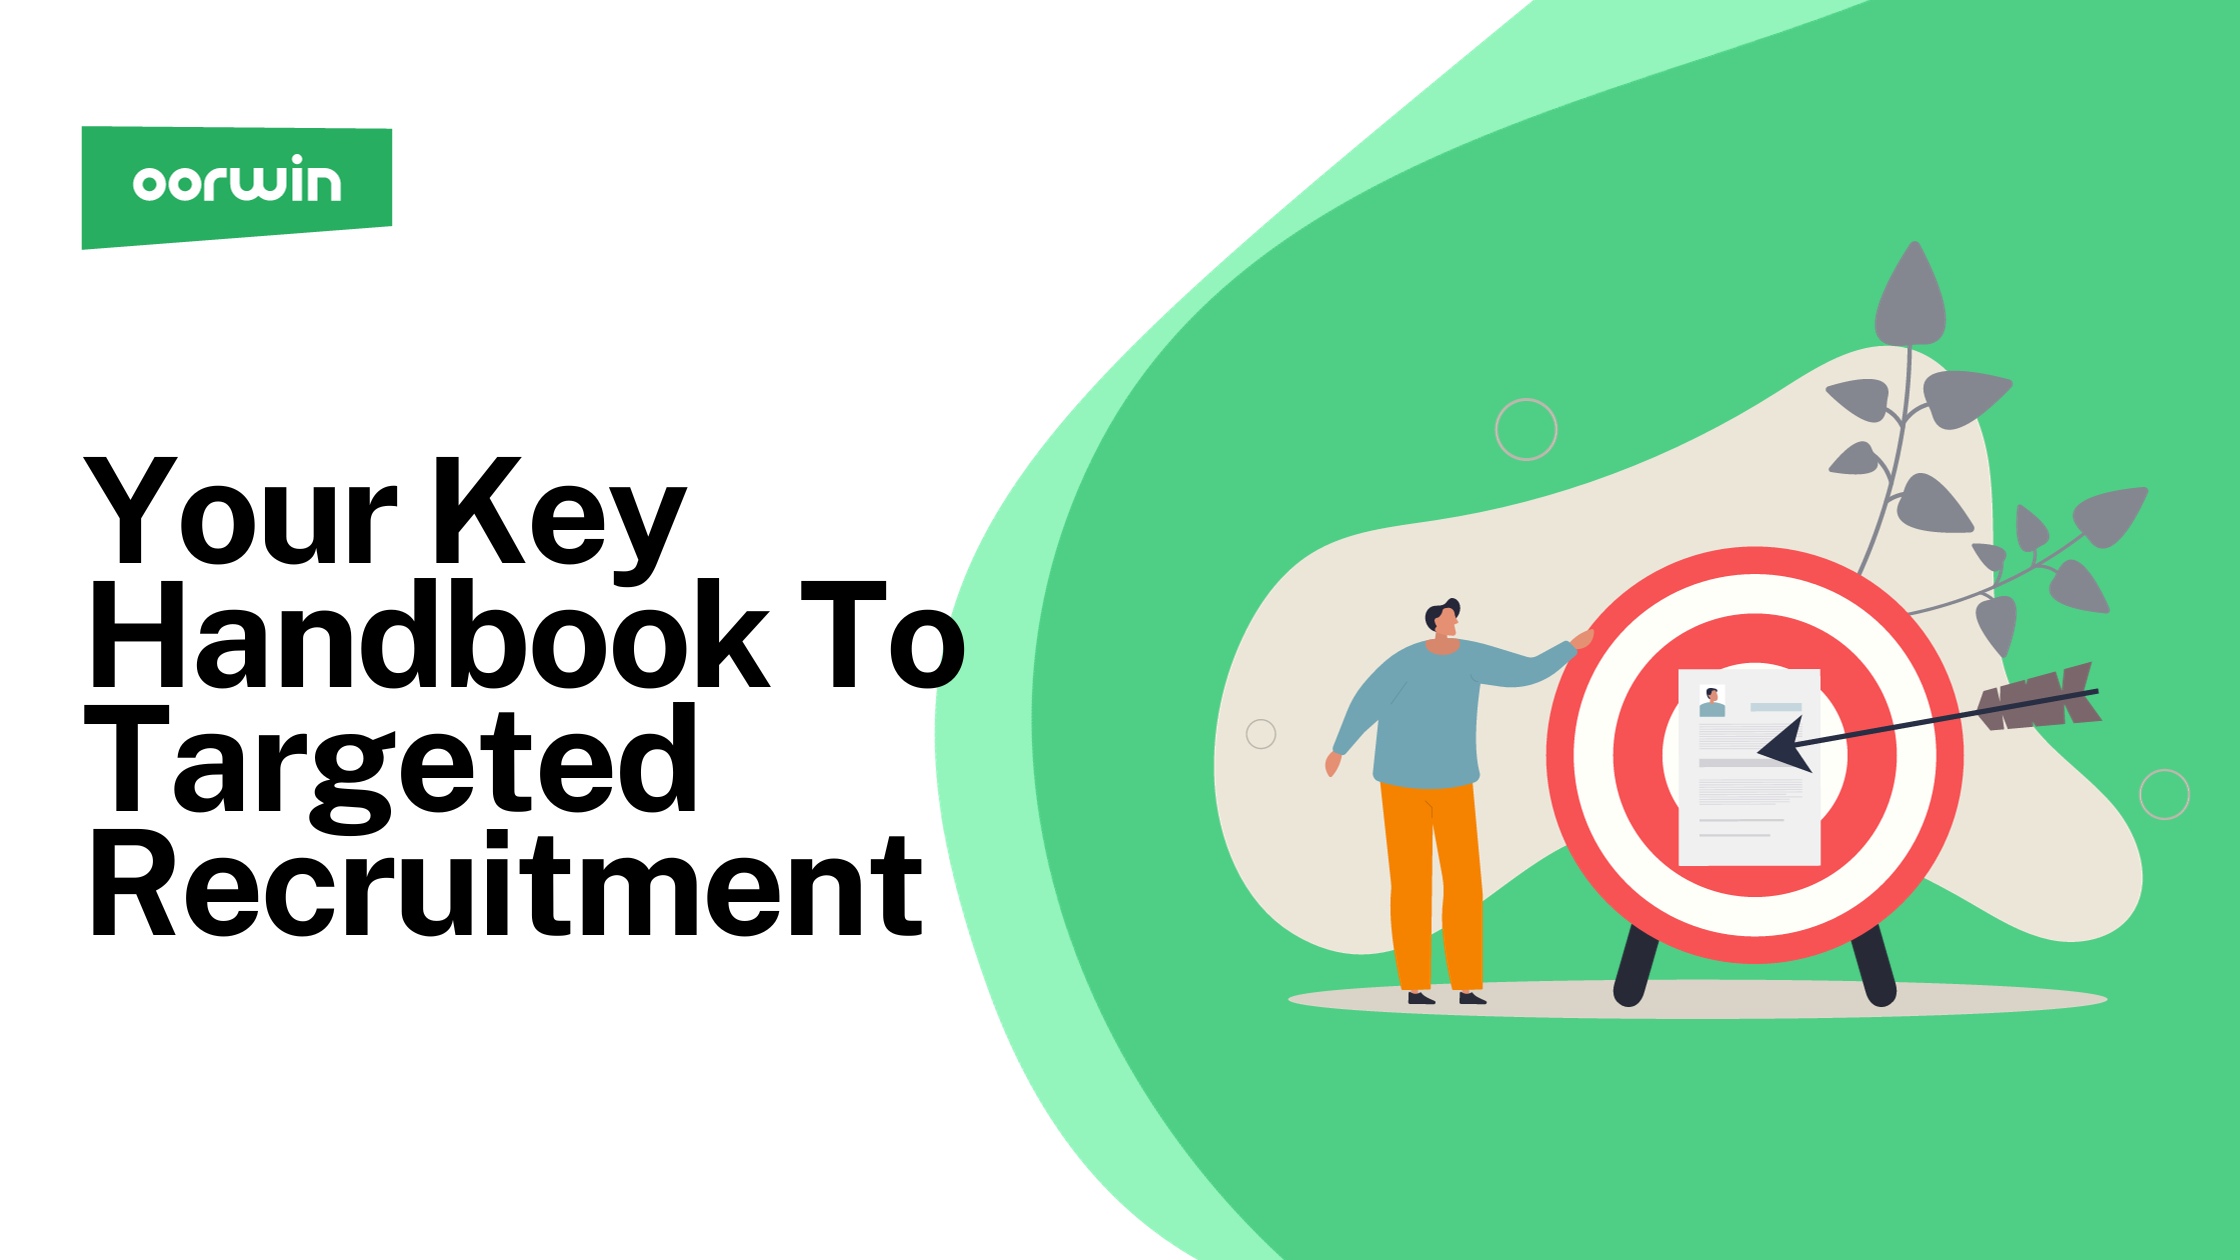 Your Key Handbook To Targeted Recruitment